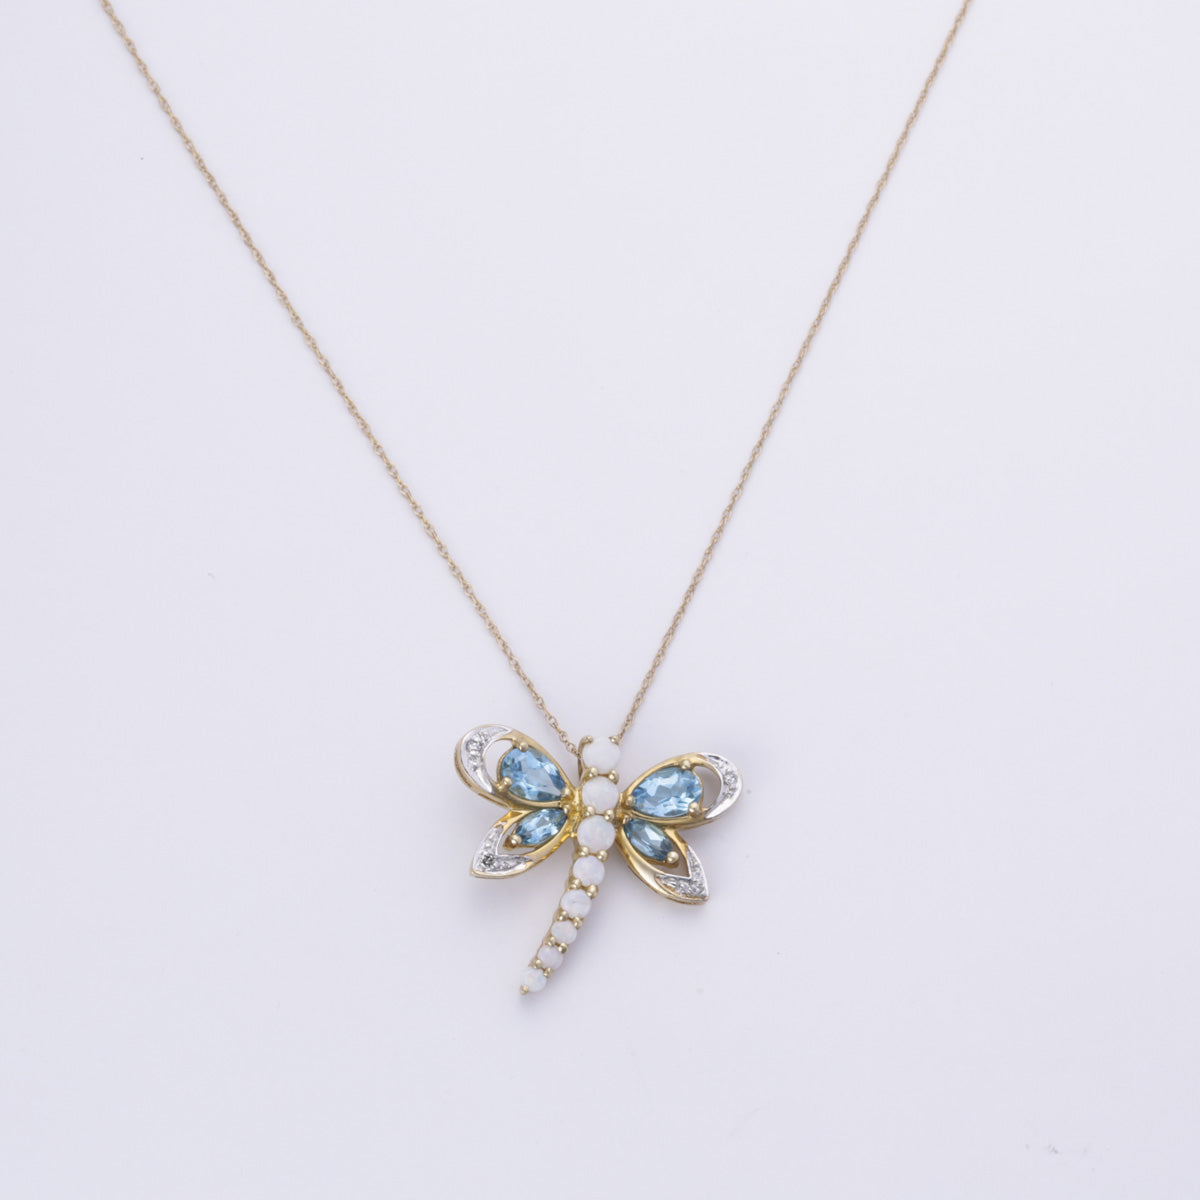 10k Yellow Gold Blue Topaz, Opal and Diamond Necklace | 0.80ctw, 0.49ctw, 0.04ctw | 16-18